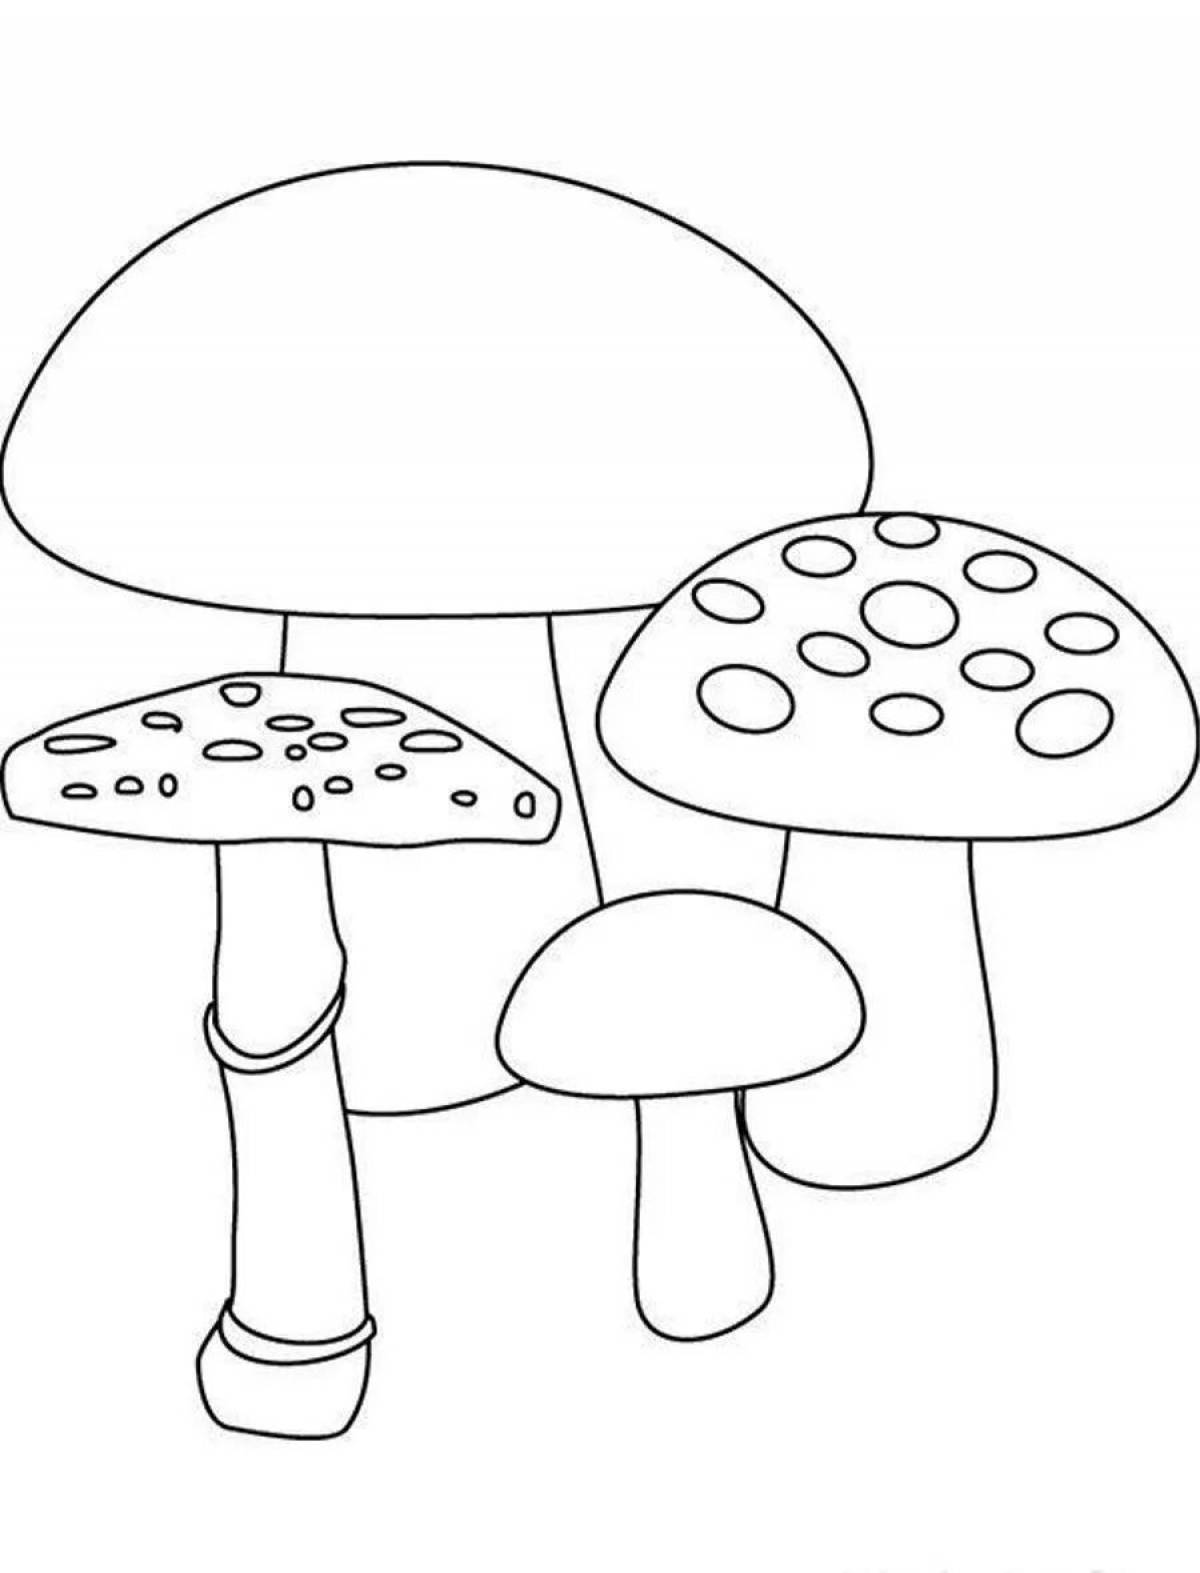 Fantastic coloring book fly agaric for kids